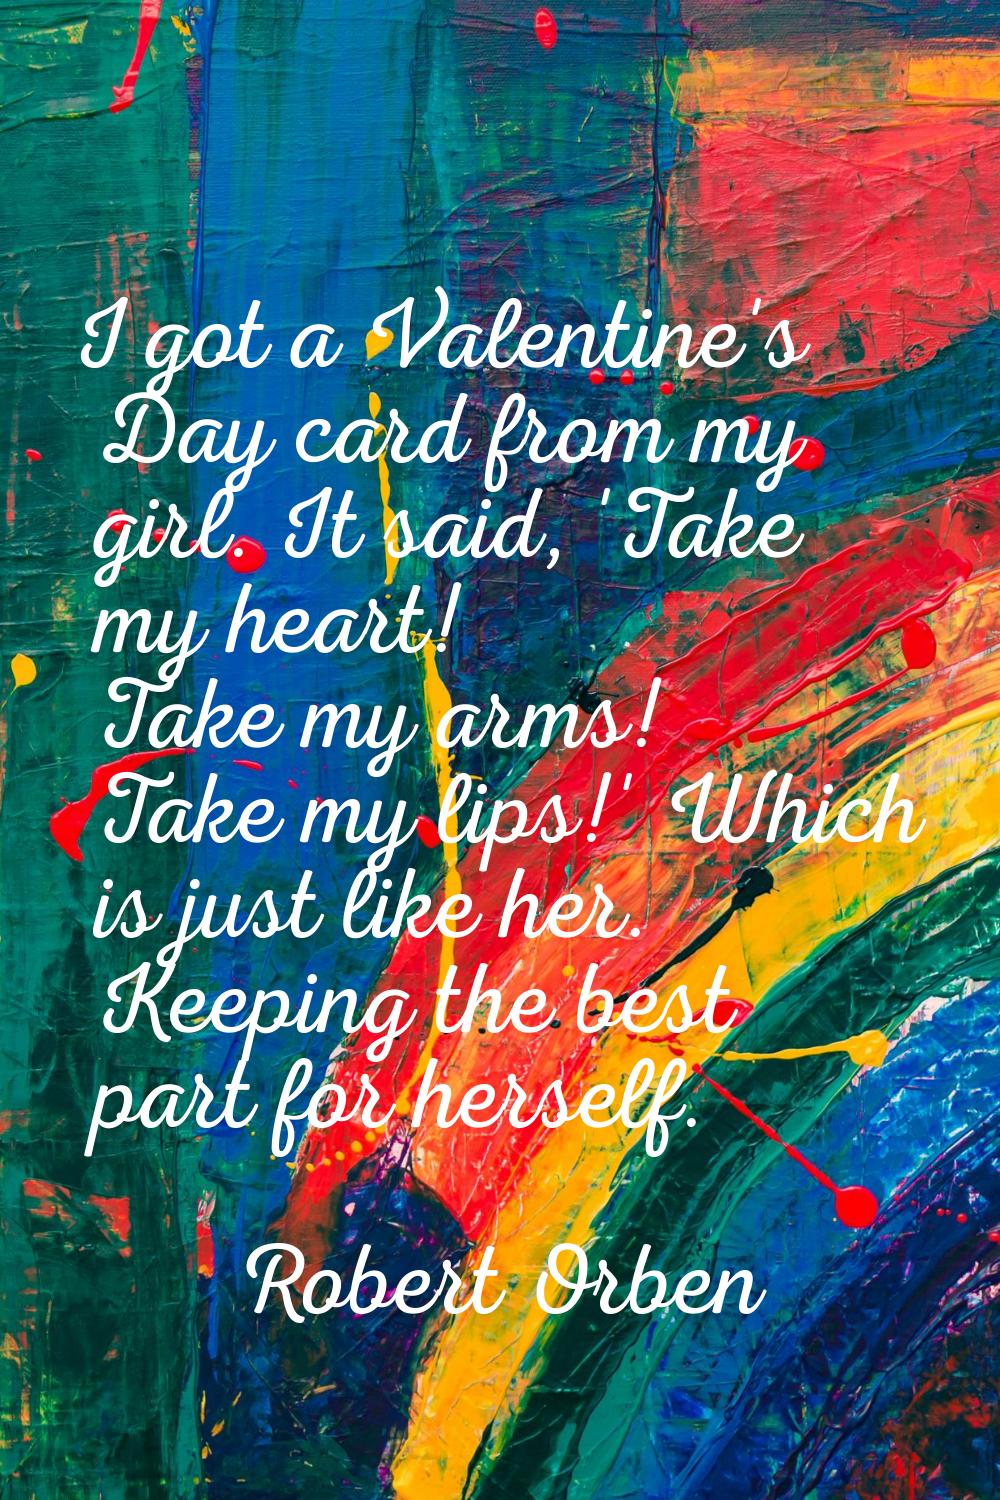 I got a Valentine's Day card from my girl. It said, 'Take my heart! Take my arms! Take my lips!' Wh